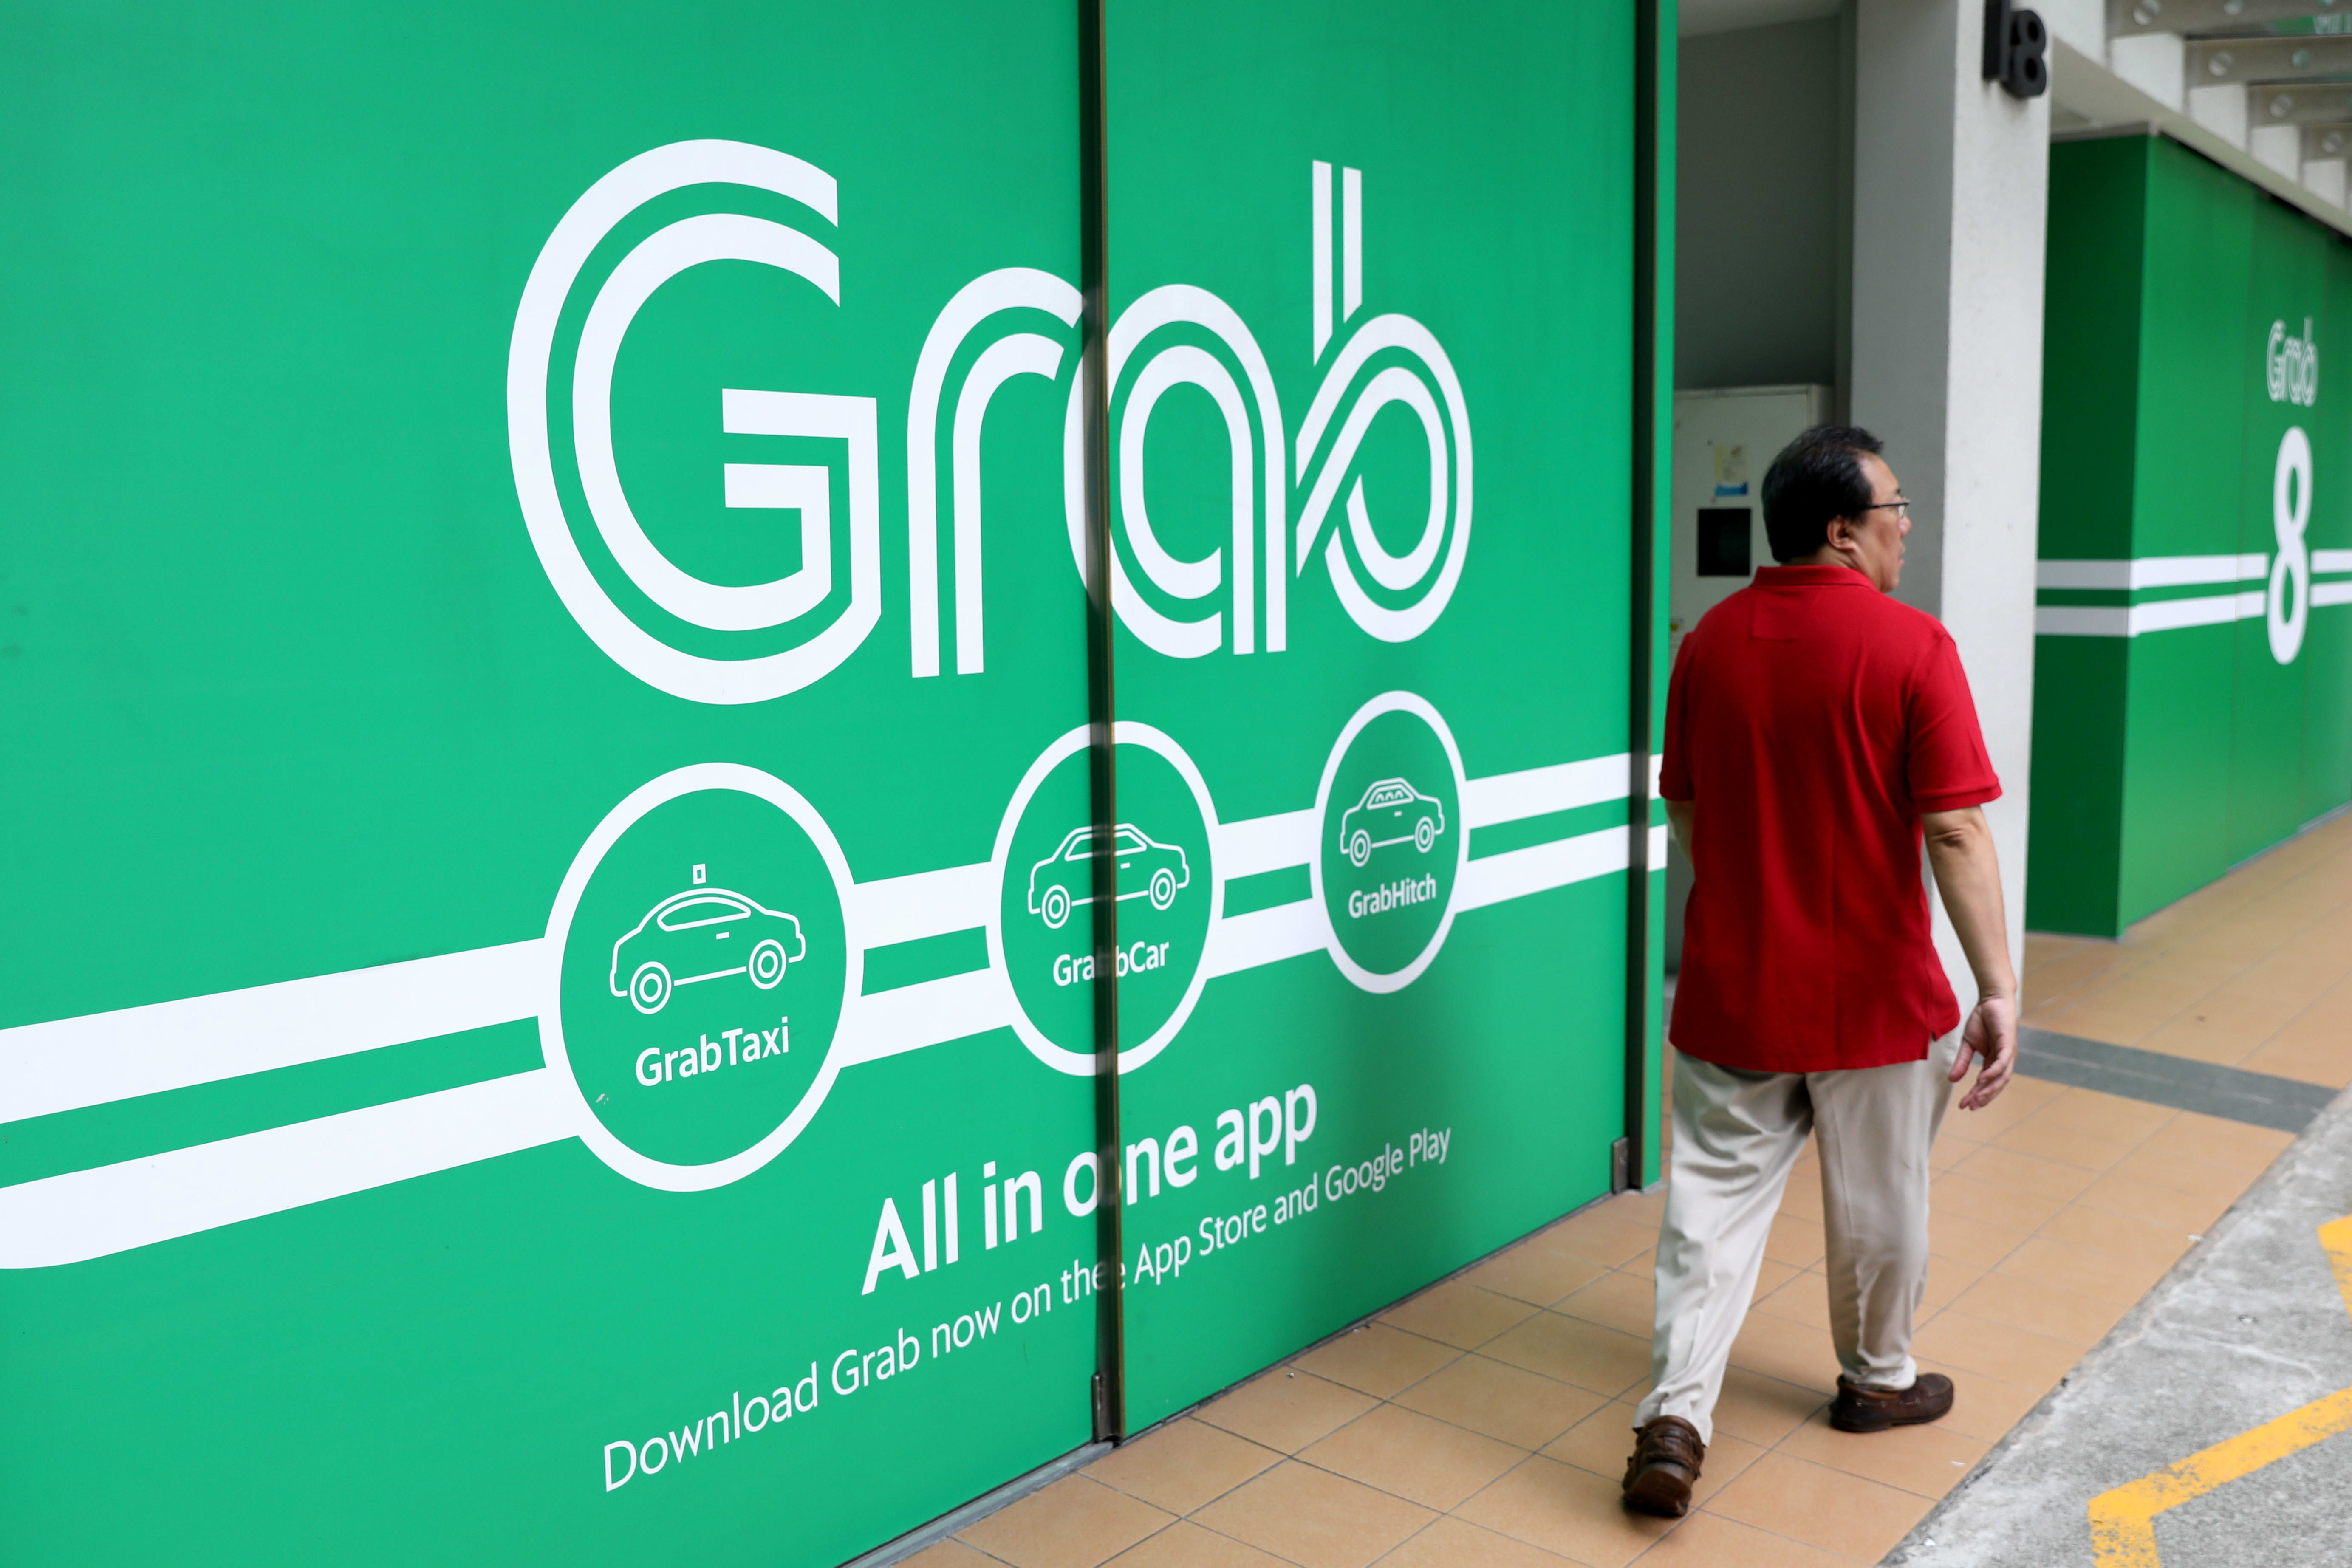 Grab, backed by SoftBank, agrees to make the transaction public in the world’s largest SPAC merger